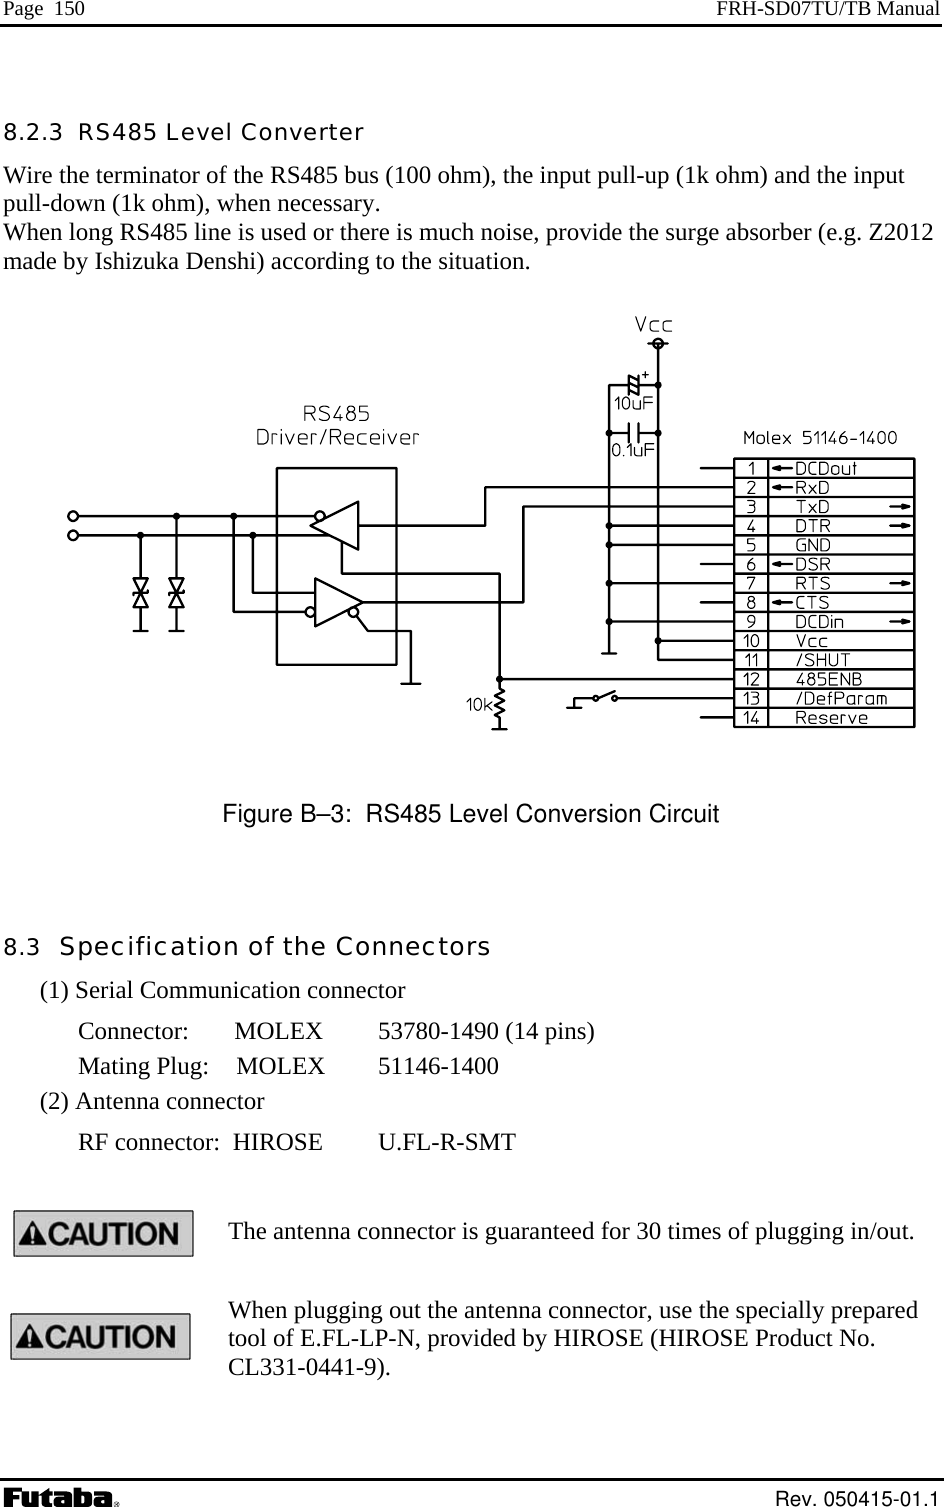 Page  150  FRH-SD07TU/TB Manual 8.2.3  RS485 Level Converter Wire the terminator of the RS485 bus (100 ohm), the input pull-up (1k ohm) and the inppull-down (1k ohm), when necessary. When long RS485 line is used or therut e is much noise, provide the surge absorber (e.g. Z2012 made by Ishizuka Denshi) according to the situation.    Figure B–3:  RS485 Level Conversion Circuit  8.3  Specification of the Connectors (1) Serial Communication connector Connector:     MOLEX   53780-1490 (14 pins) Mating Plug:    MOLEX   51146-1400 (2) Antenna connector RF connector:  HIROSE  U.FL-R-SMT  The antenna connector is guaranteed for 30 times of plugging in/out. When plugging out the antenna connector, use the specially prepared tool of E.FL-LP-N, provided by HIROSE (HIROSE Product No. CL331-0441-9).    Rev. 050415-01.1 